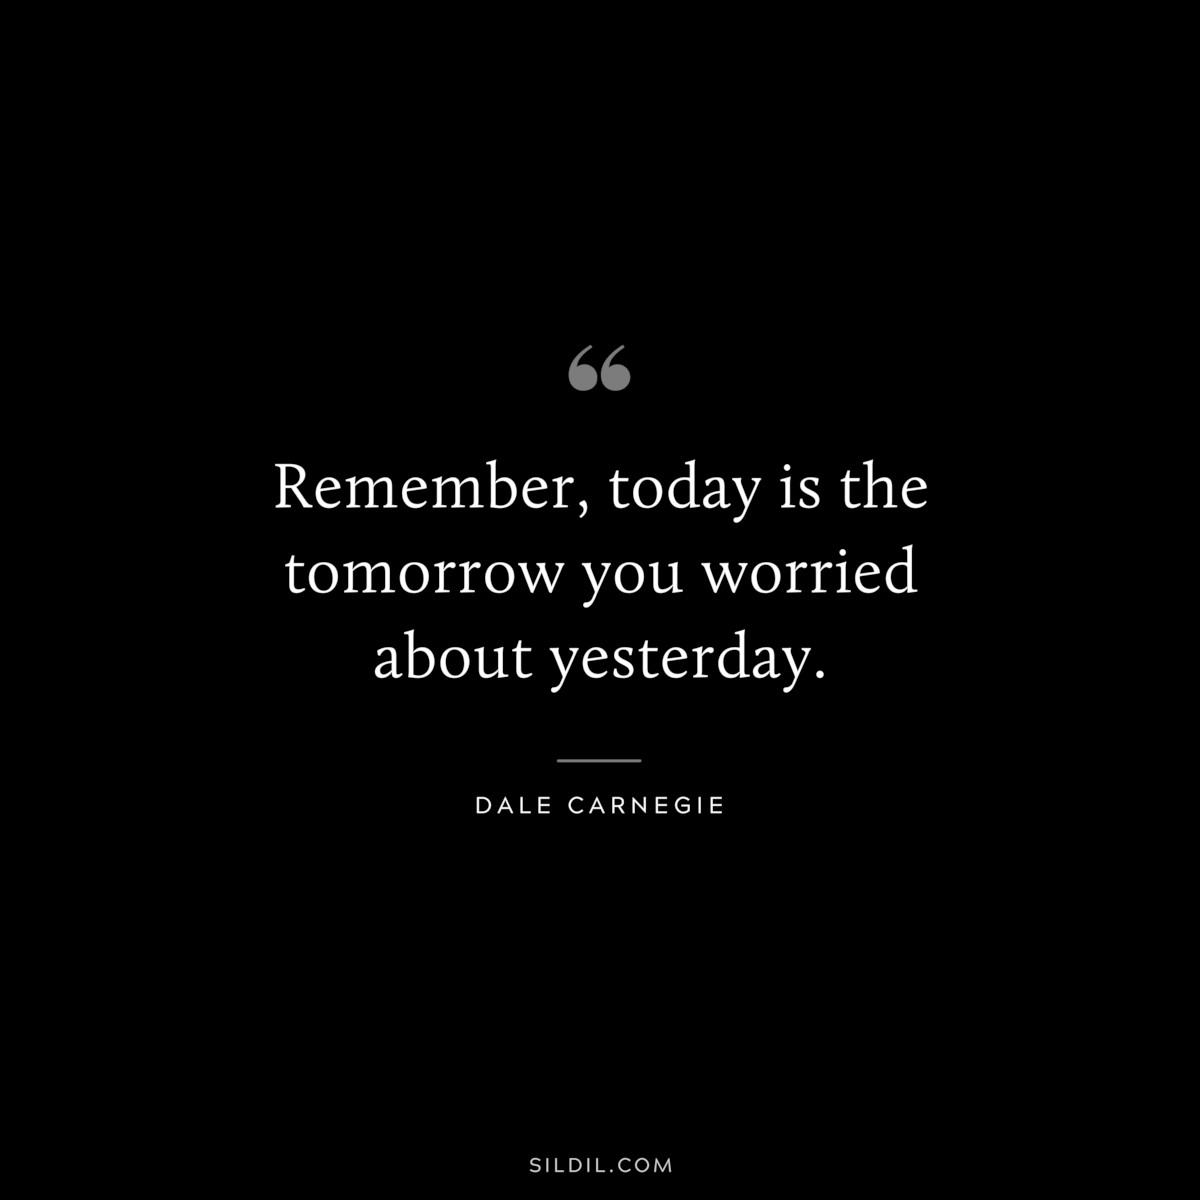 Remember, today is the tomorrow you worried about yesterday.― Dale Carnegie